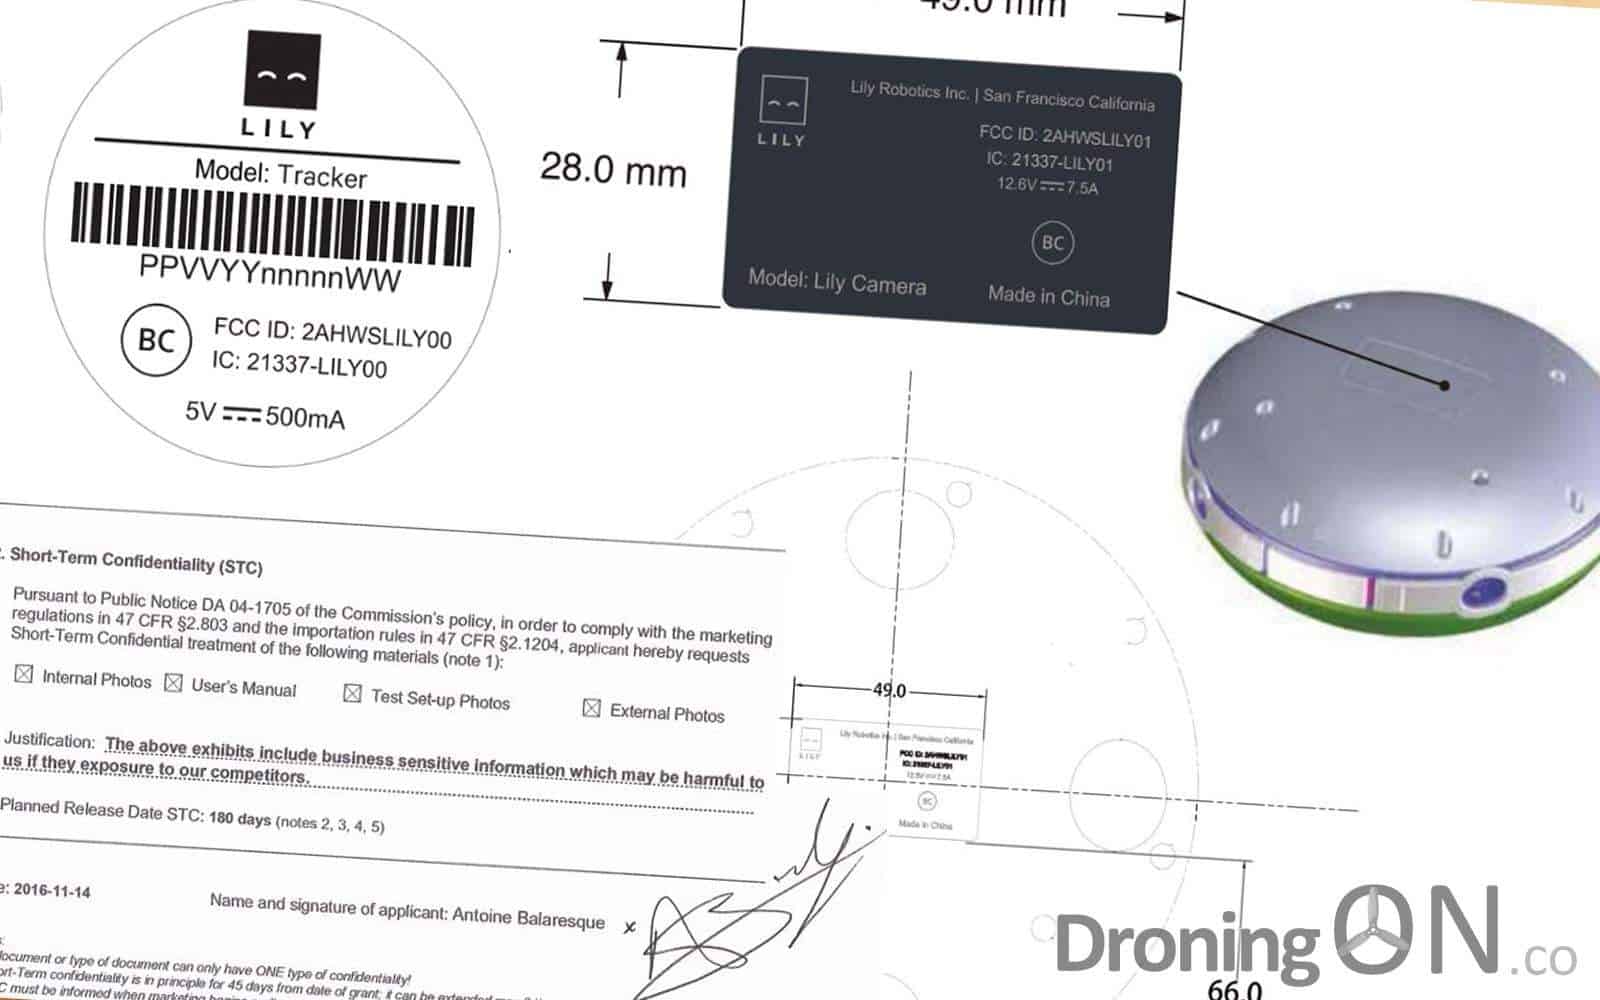 Lily Drone's FCC application is approved but still no communication